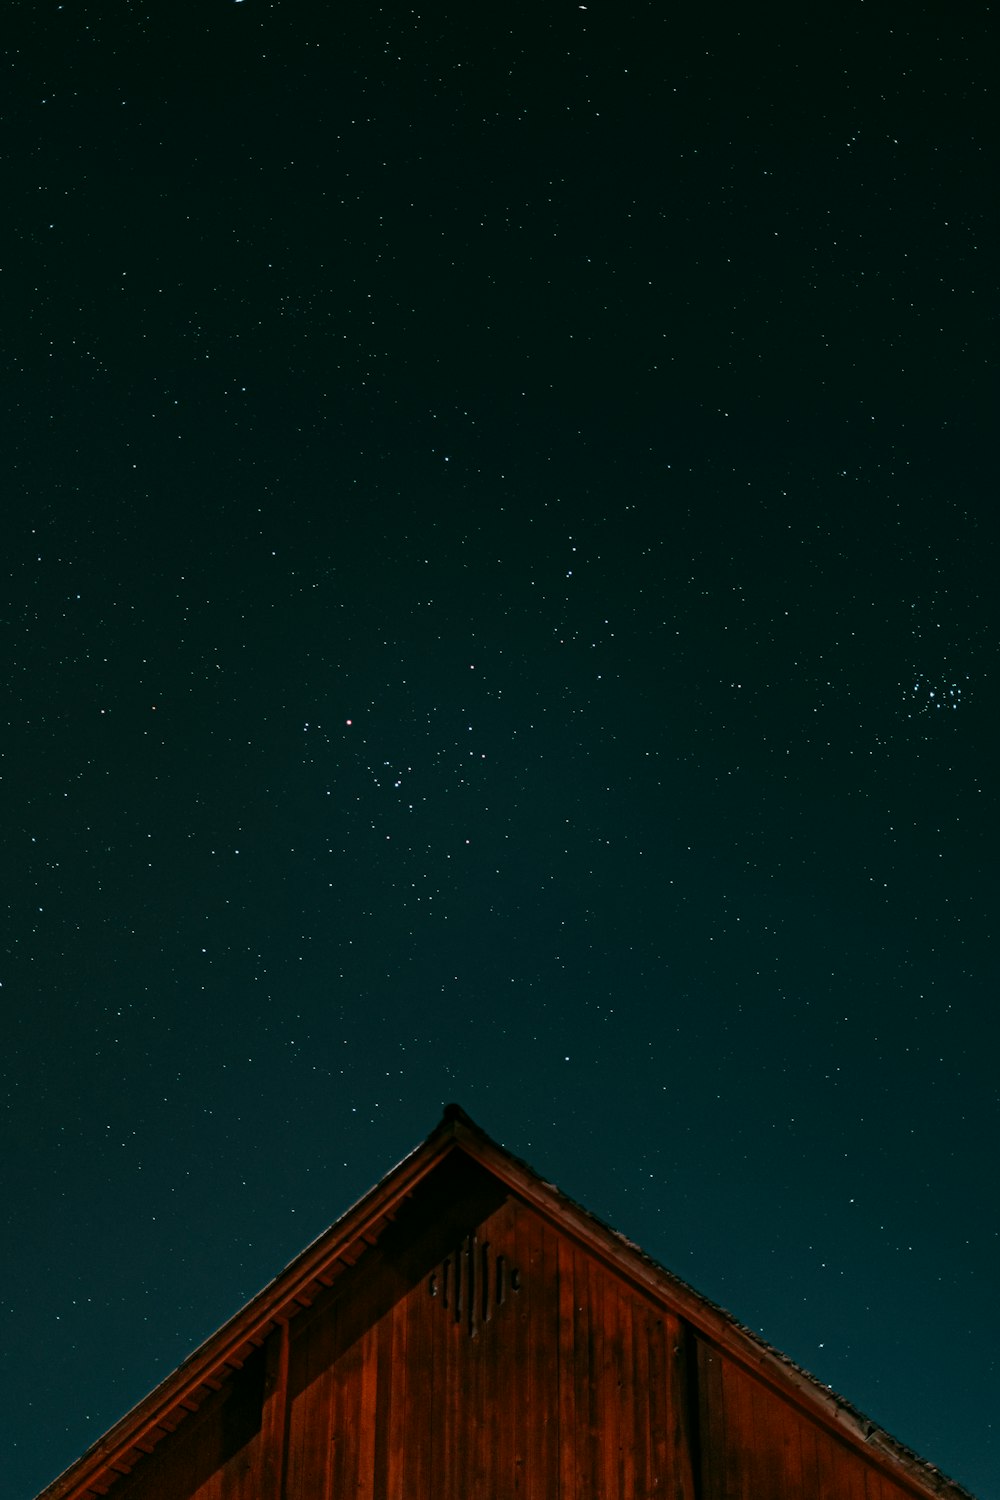 the night sky with stars above a barn